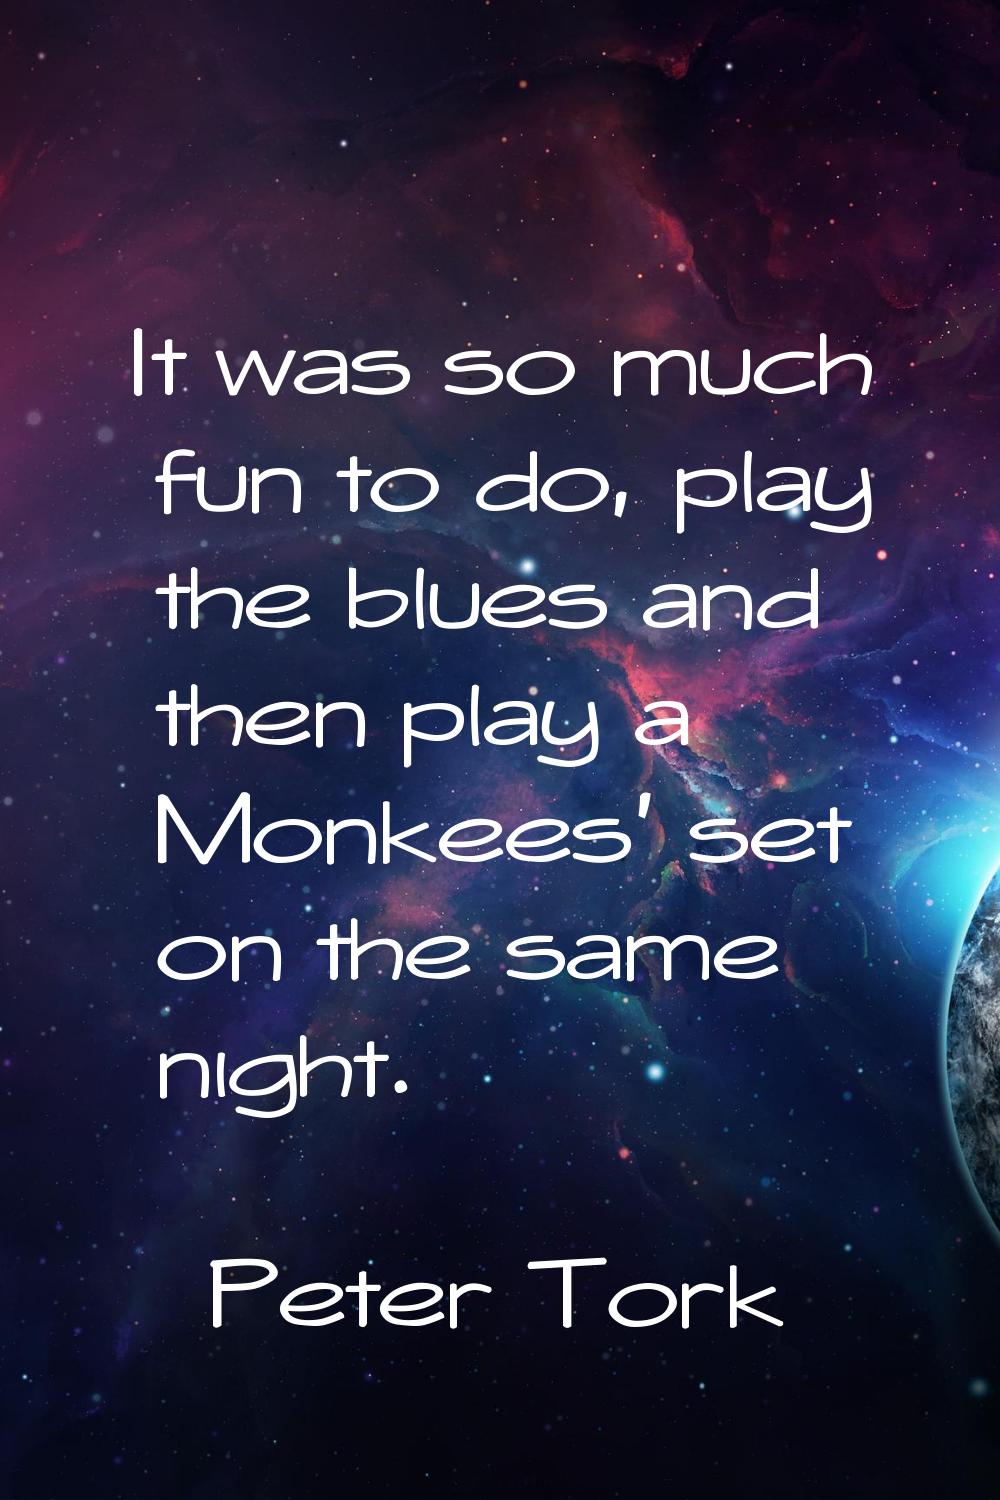 It was so much fun to do, play the blues and then play a Monkees' set on the same night.